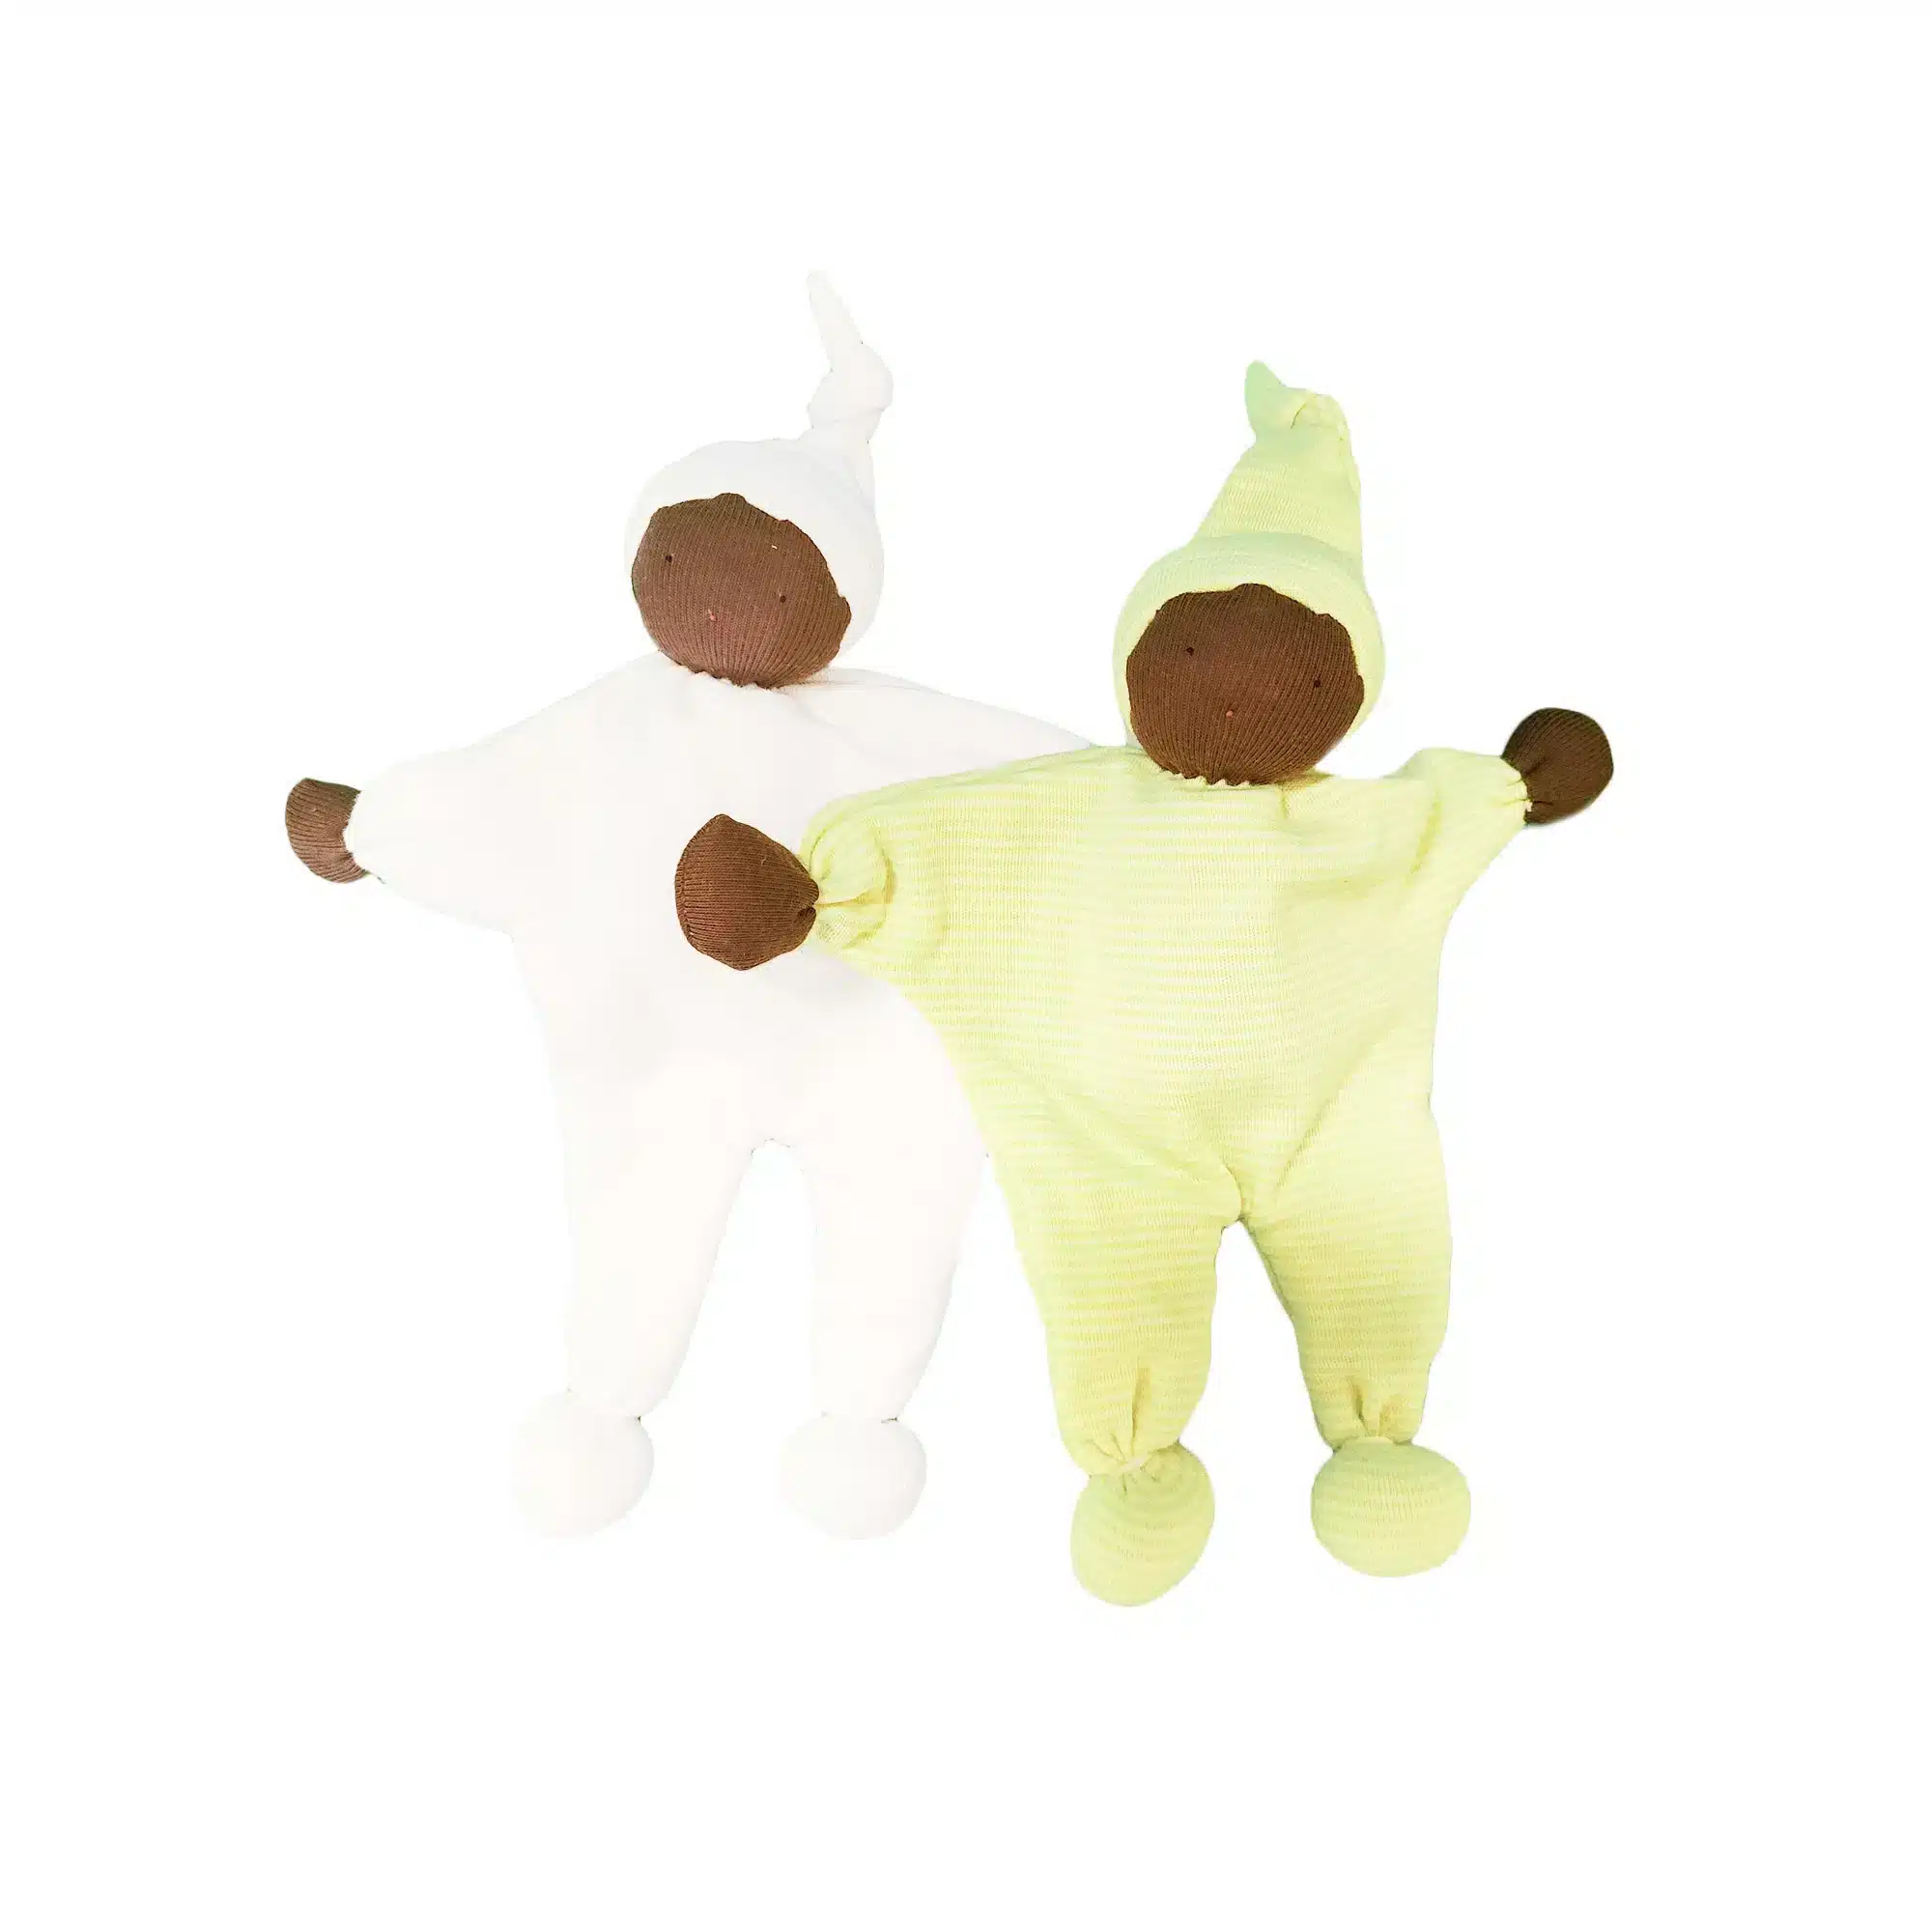 Under the Nile Organic Cotton Buddy Lovey Doll – Surprise Colors and Patterns